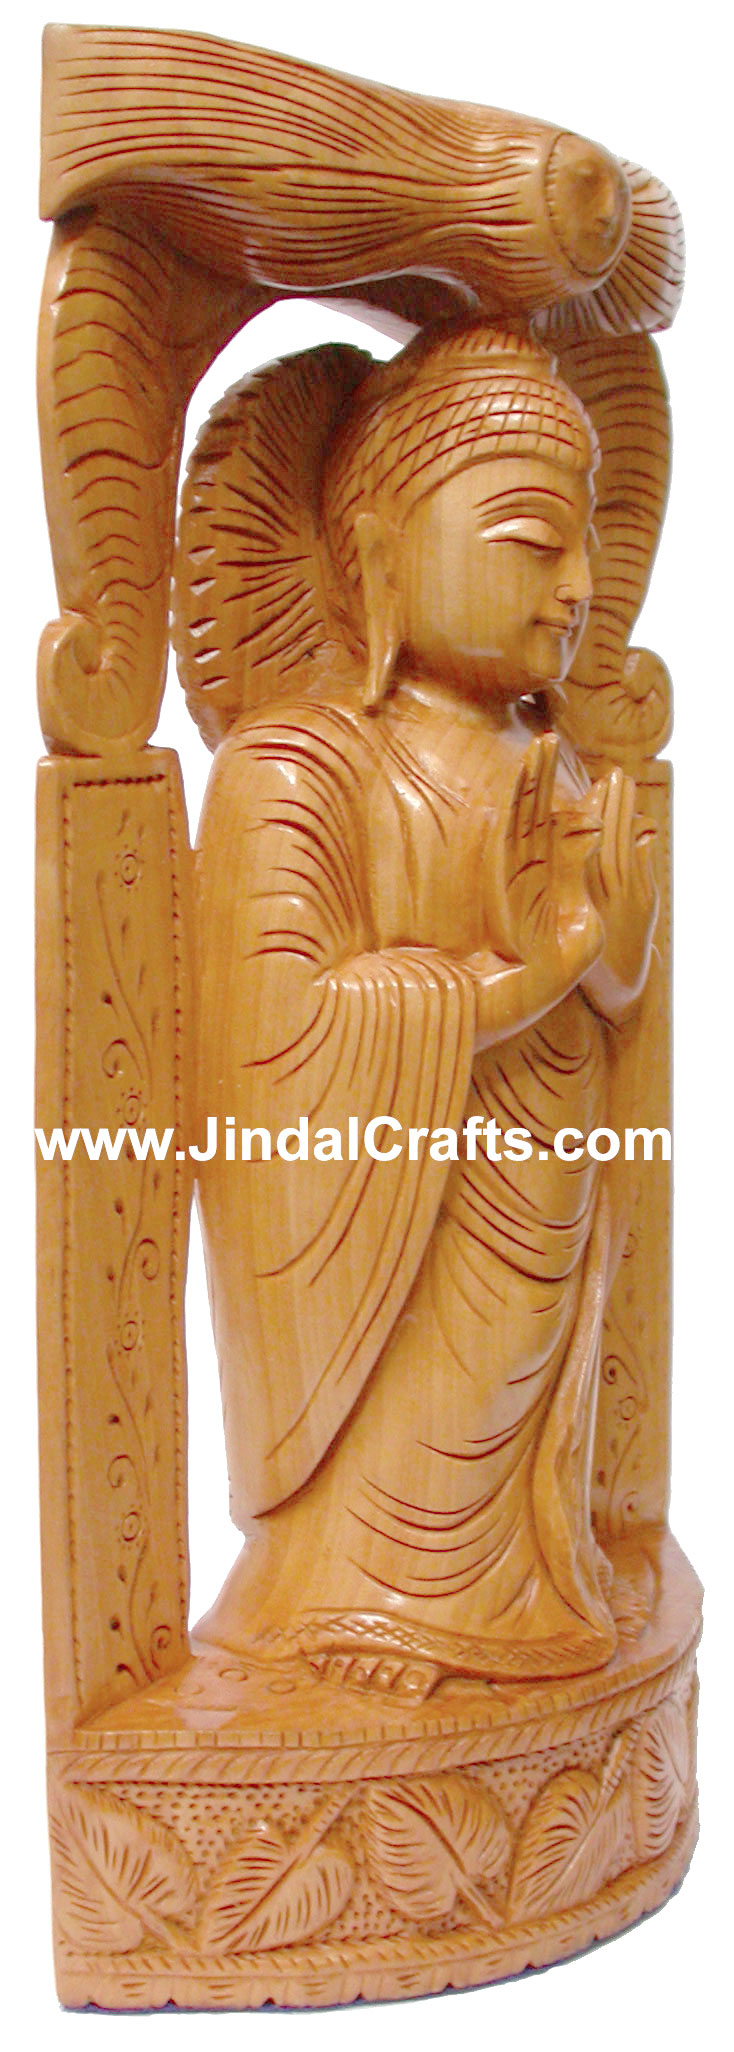 Wood Sculpture Hand Crafted Peaceful Buddha in Meditation Sculpture Statue Idol